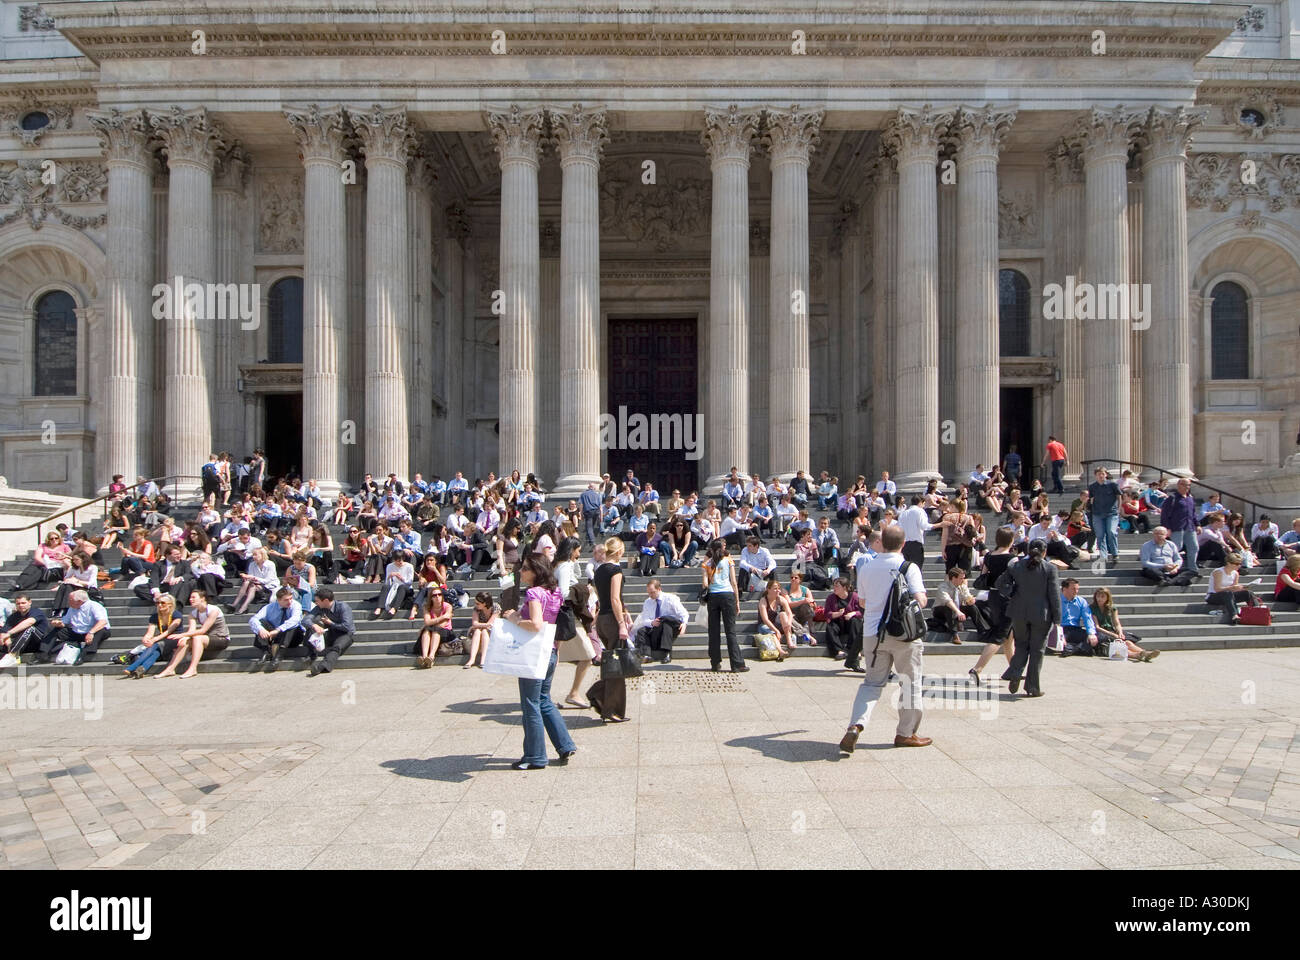 St Pauls cathedral entrance steps crowded with office workers and tourists lunch break time on a hot summers day Stock Photo